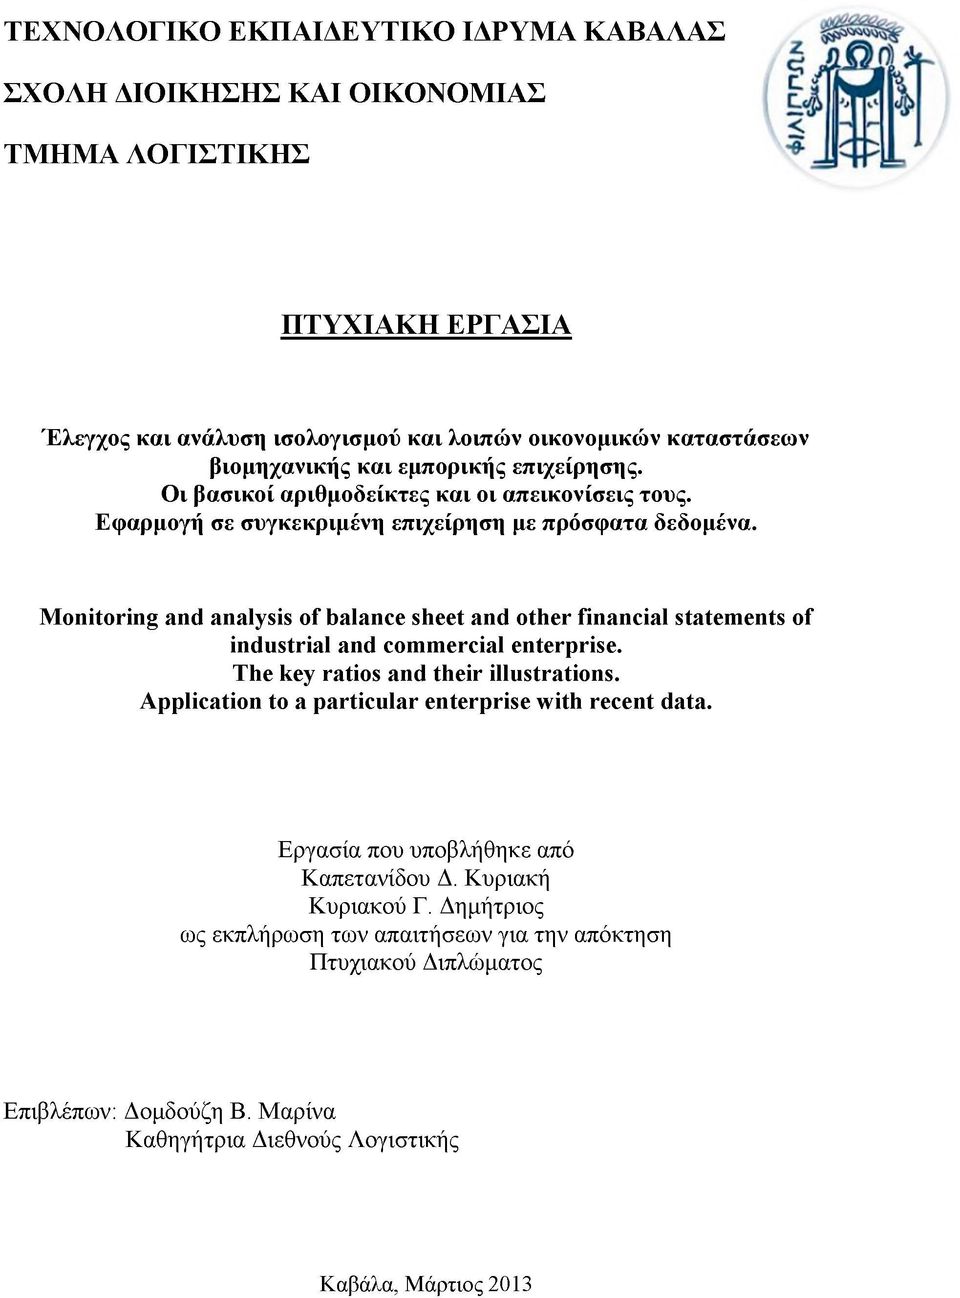 M onitoring and analysis of balance sheet and other financial statements of industrial and com m ercial enterprise. The key ratios and their illustrations.